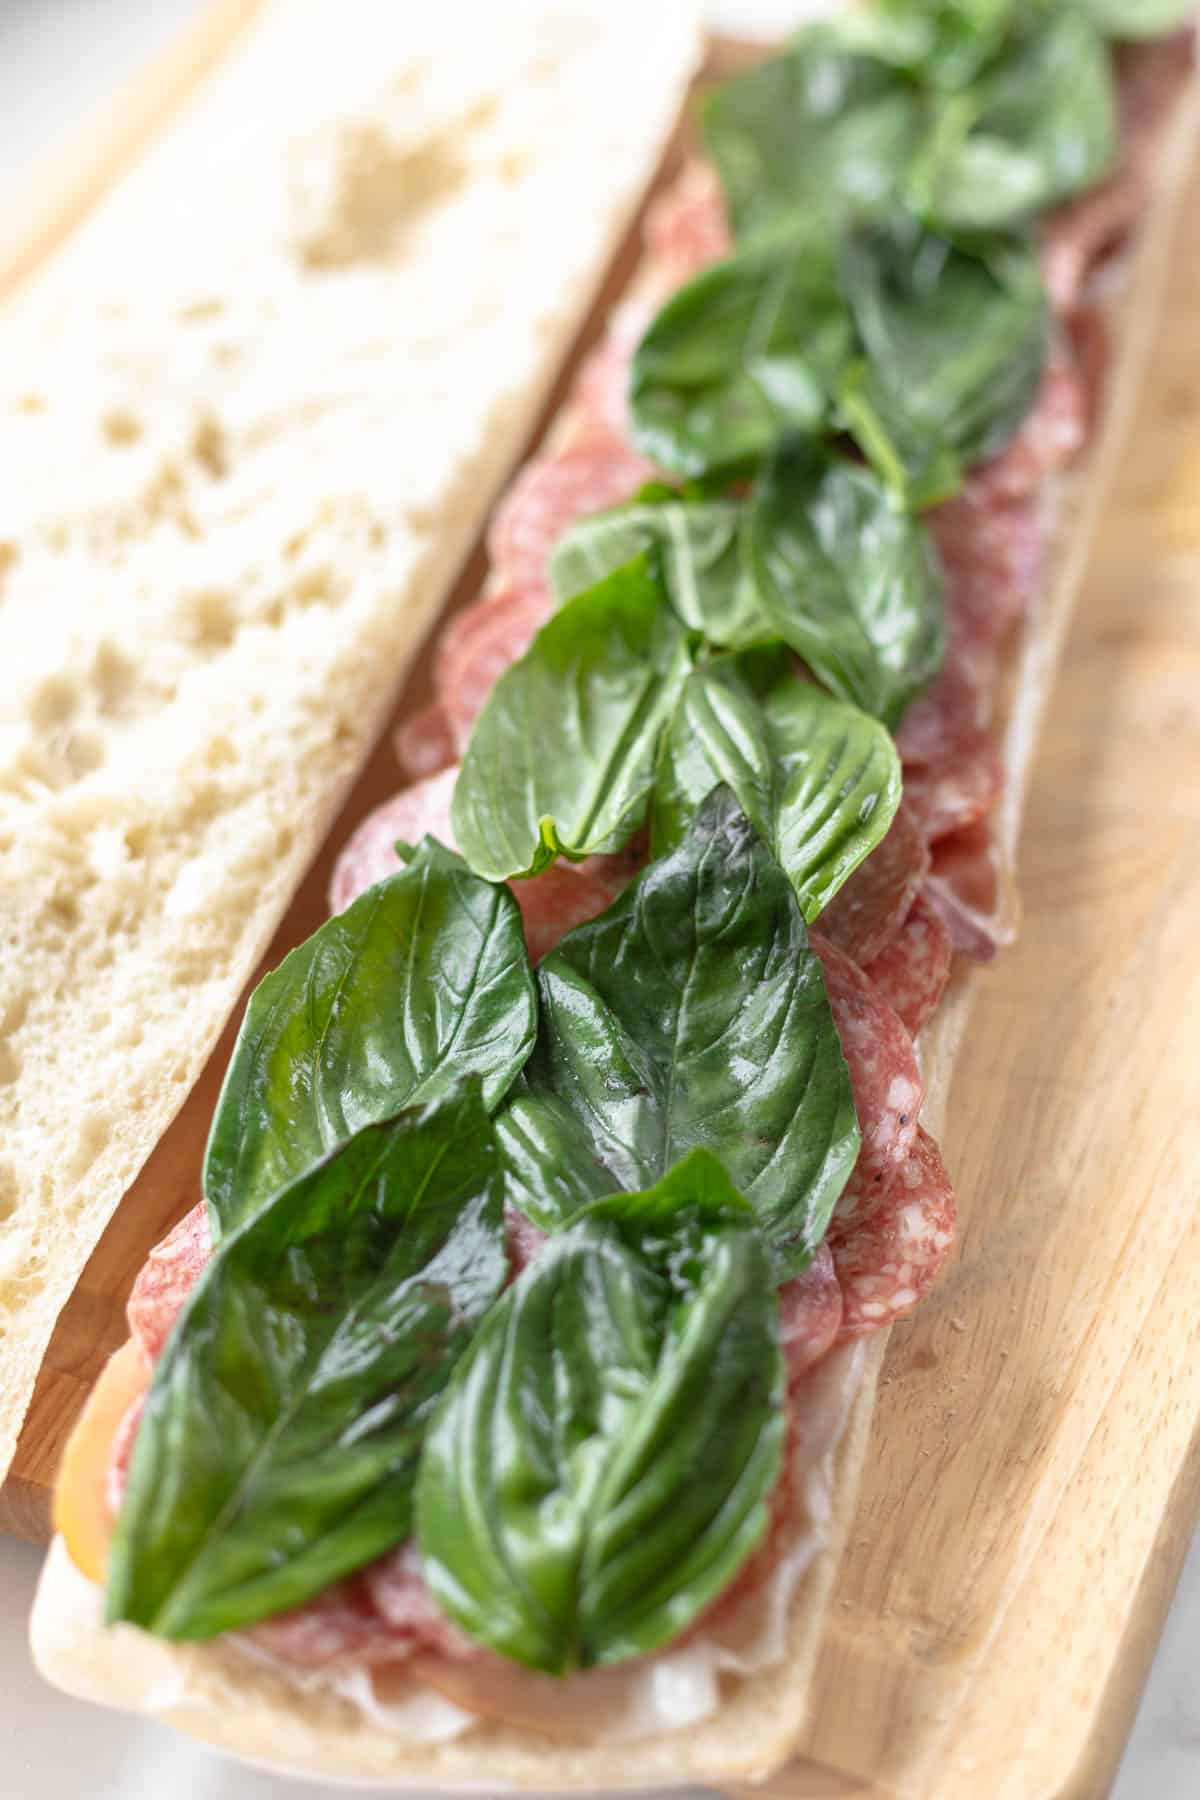 salami and basil layered on bread next to plain bread on a wooden cutting board